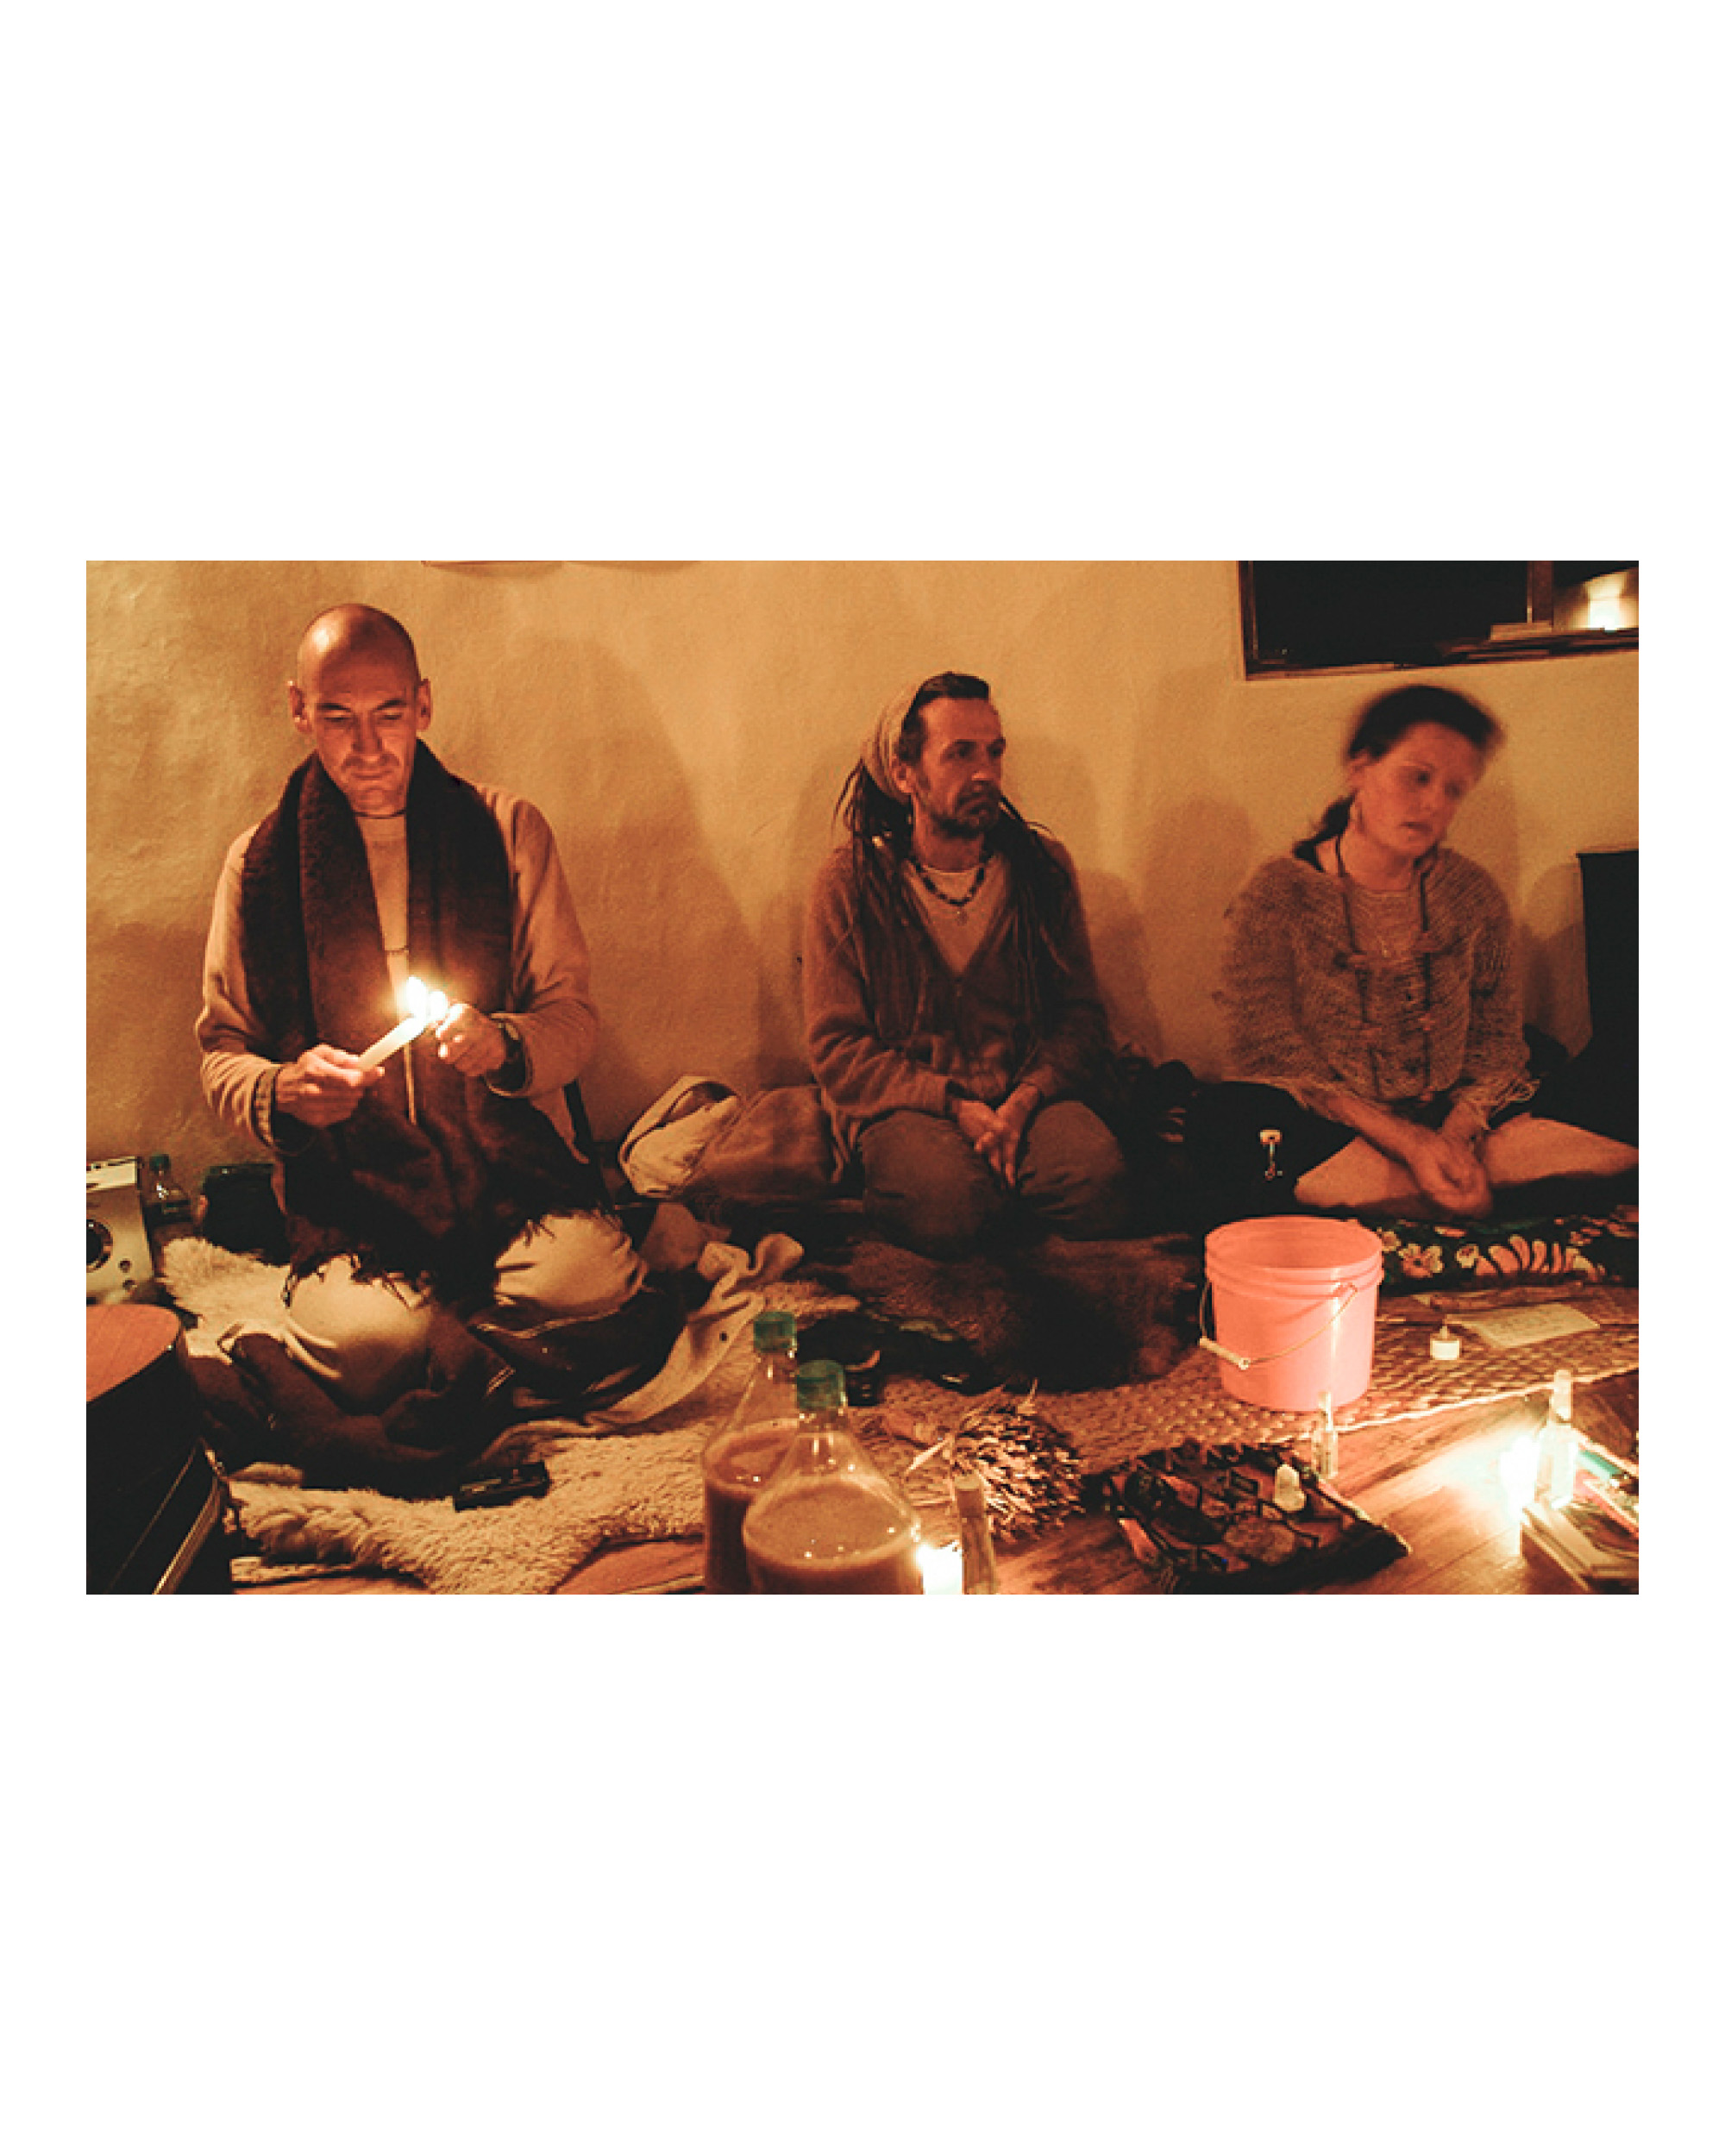 Diego Palma, left, conducting a healing ceremony in Peru.